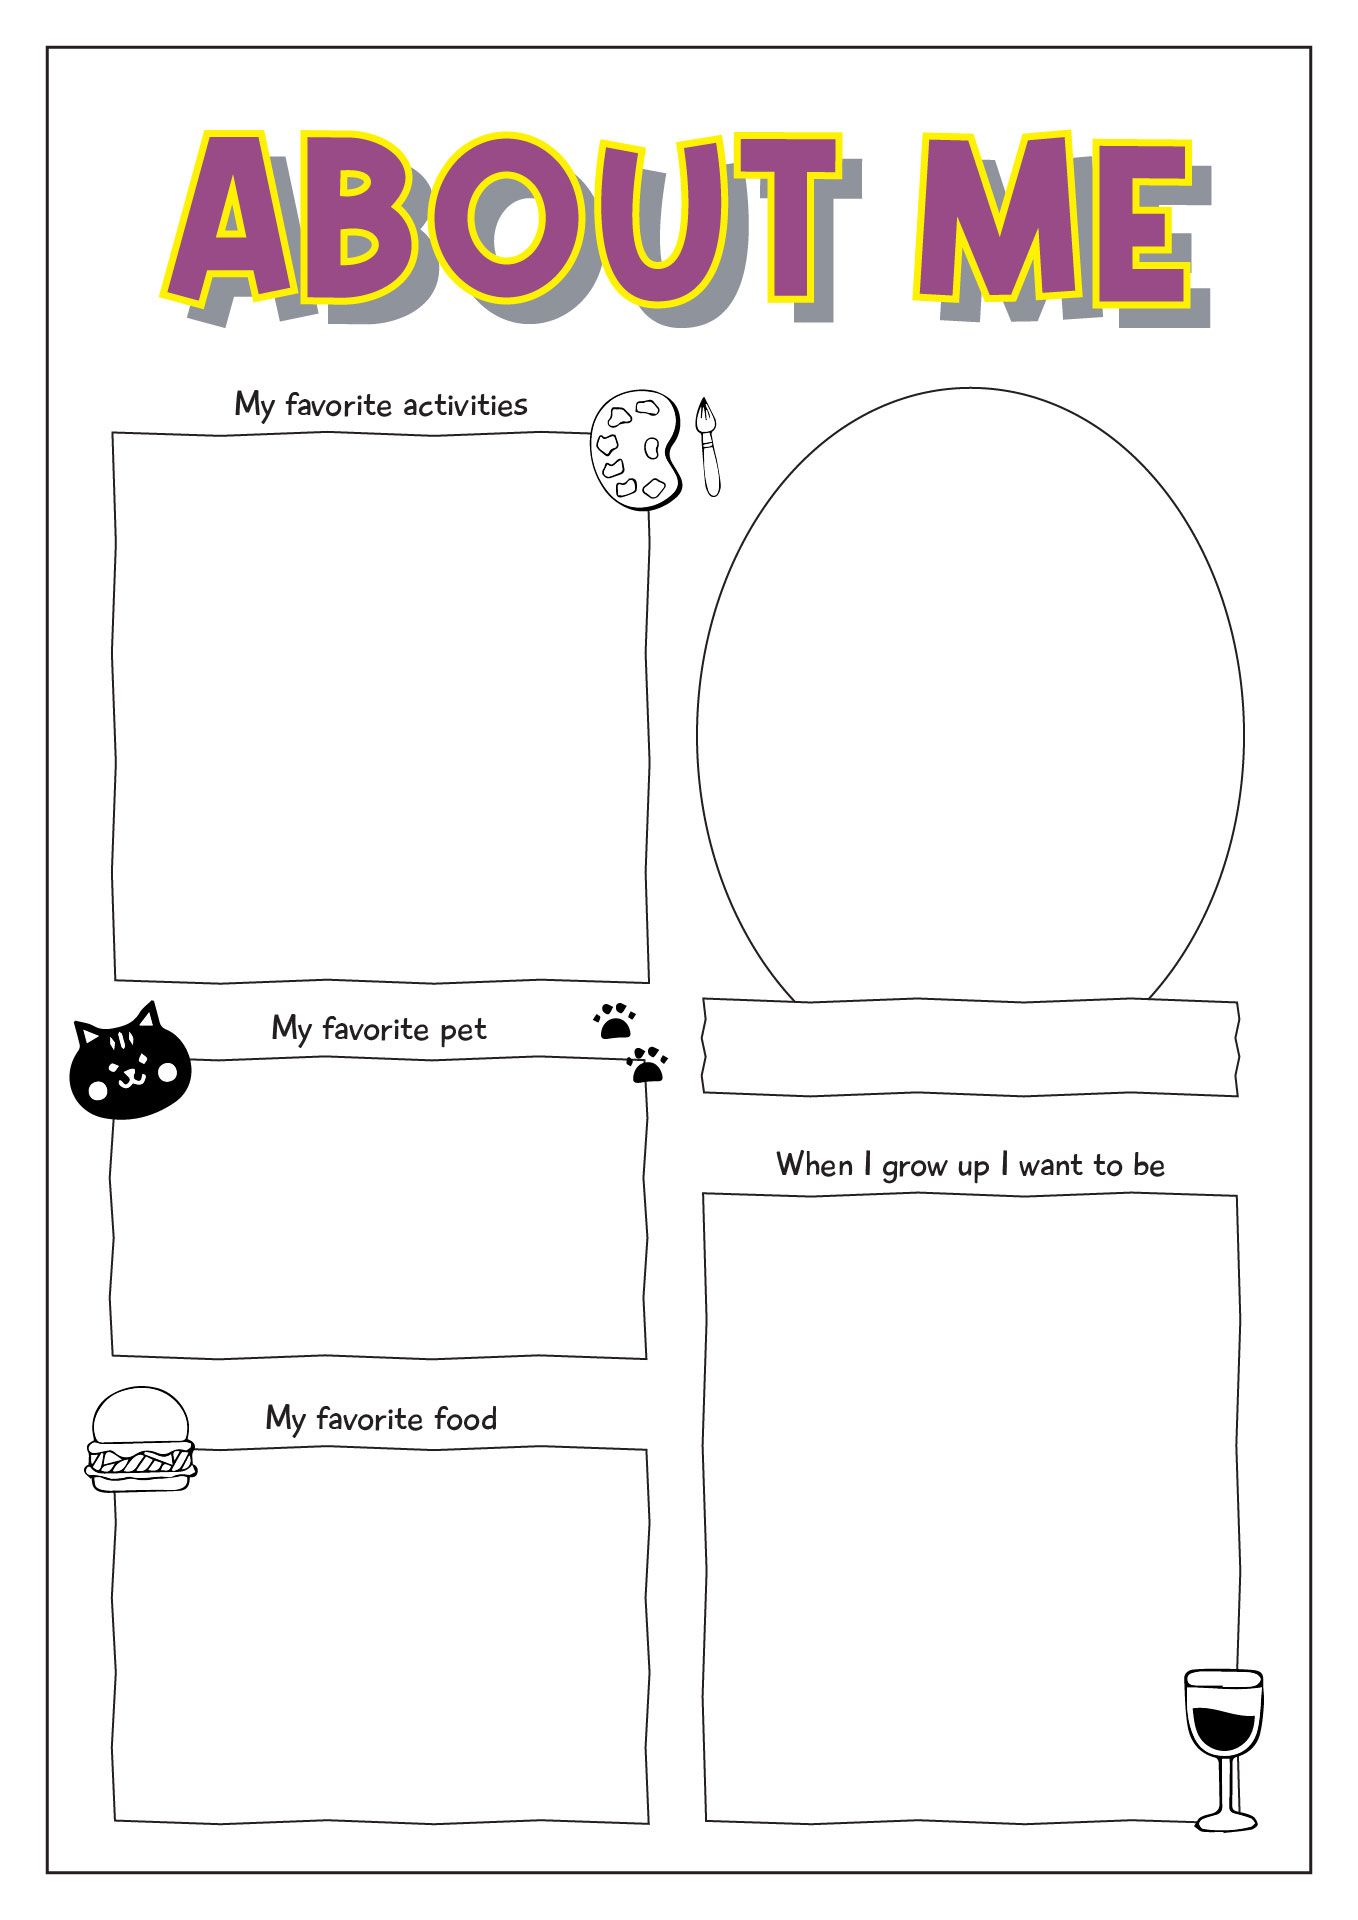 All About Me Worksheet for Kids